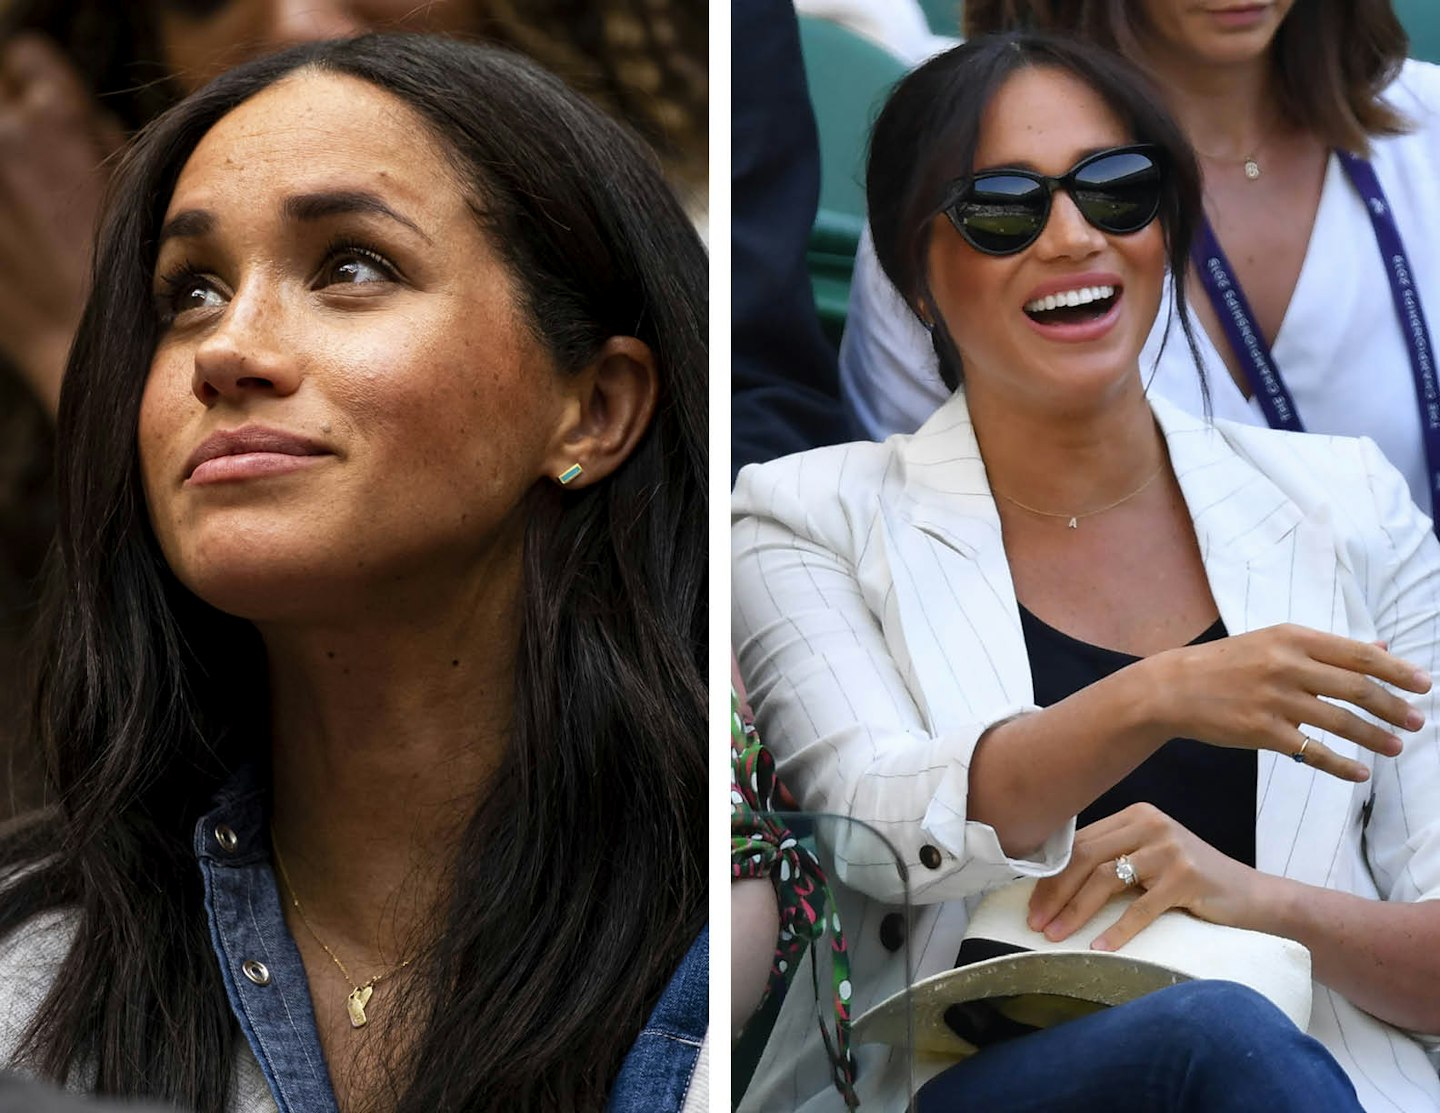 Meghan's initial necklaces on display at the US Open and Wimbledon